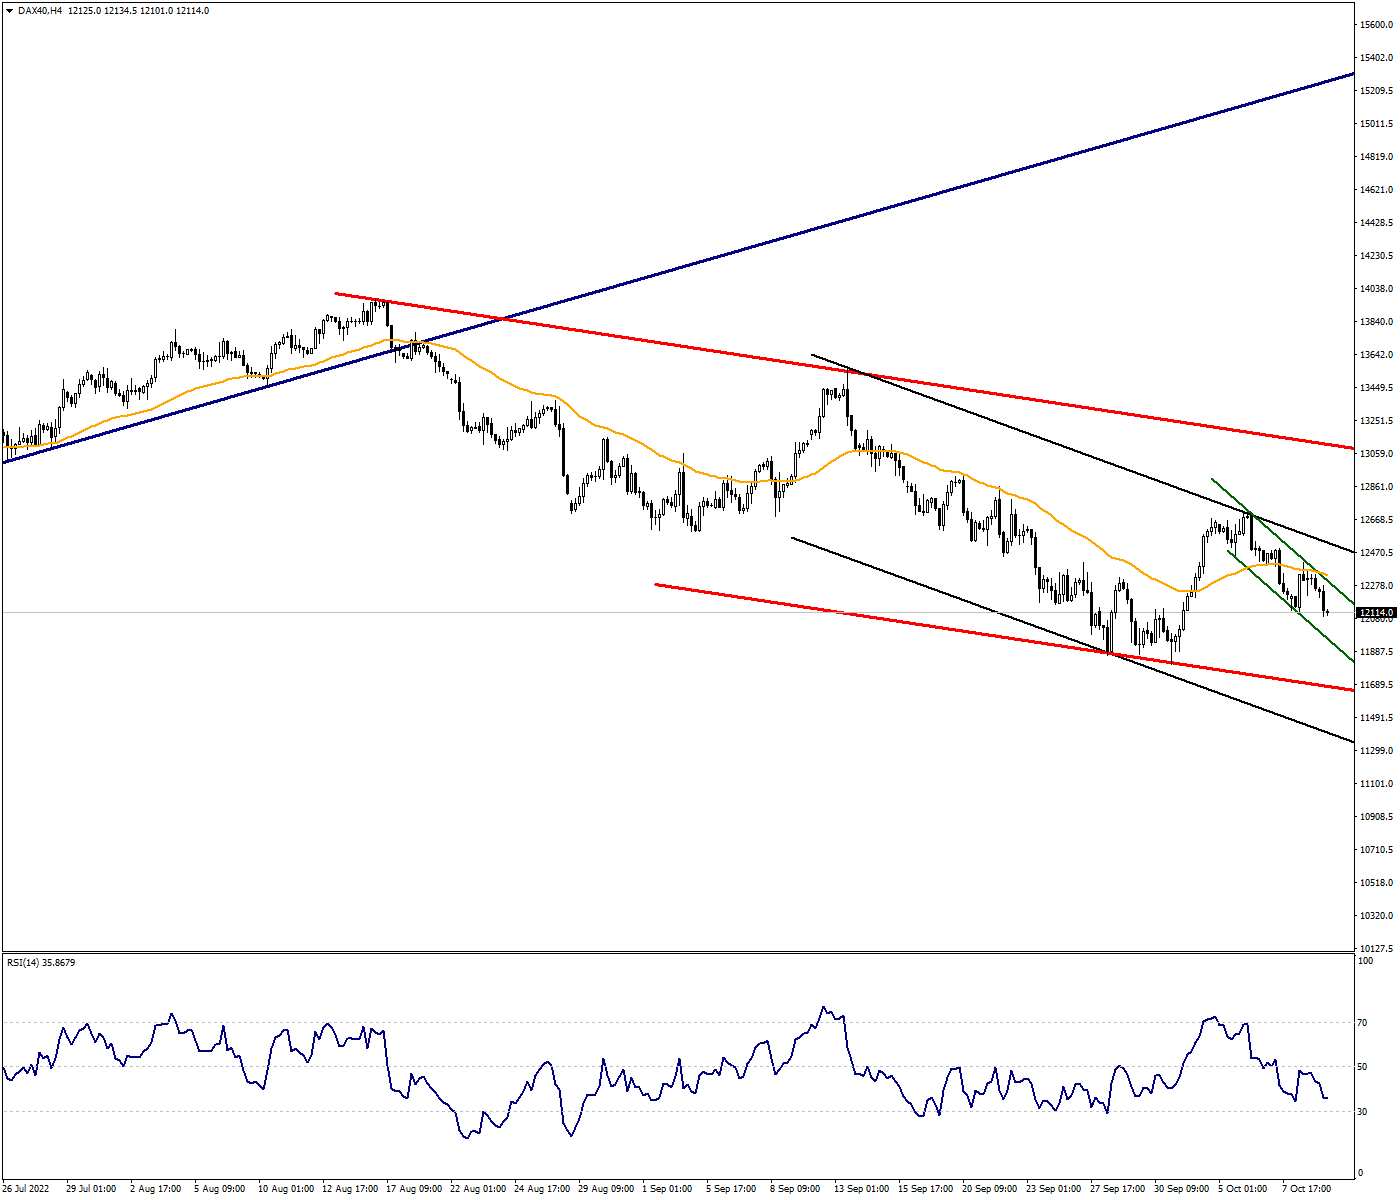 DAX40 Continues to Defend Descending Channel Movement